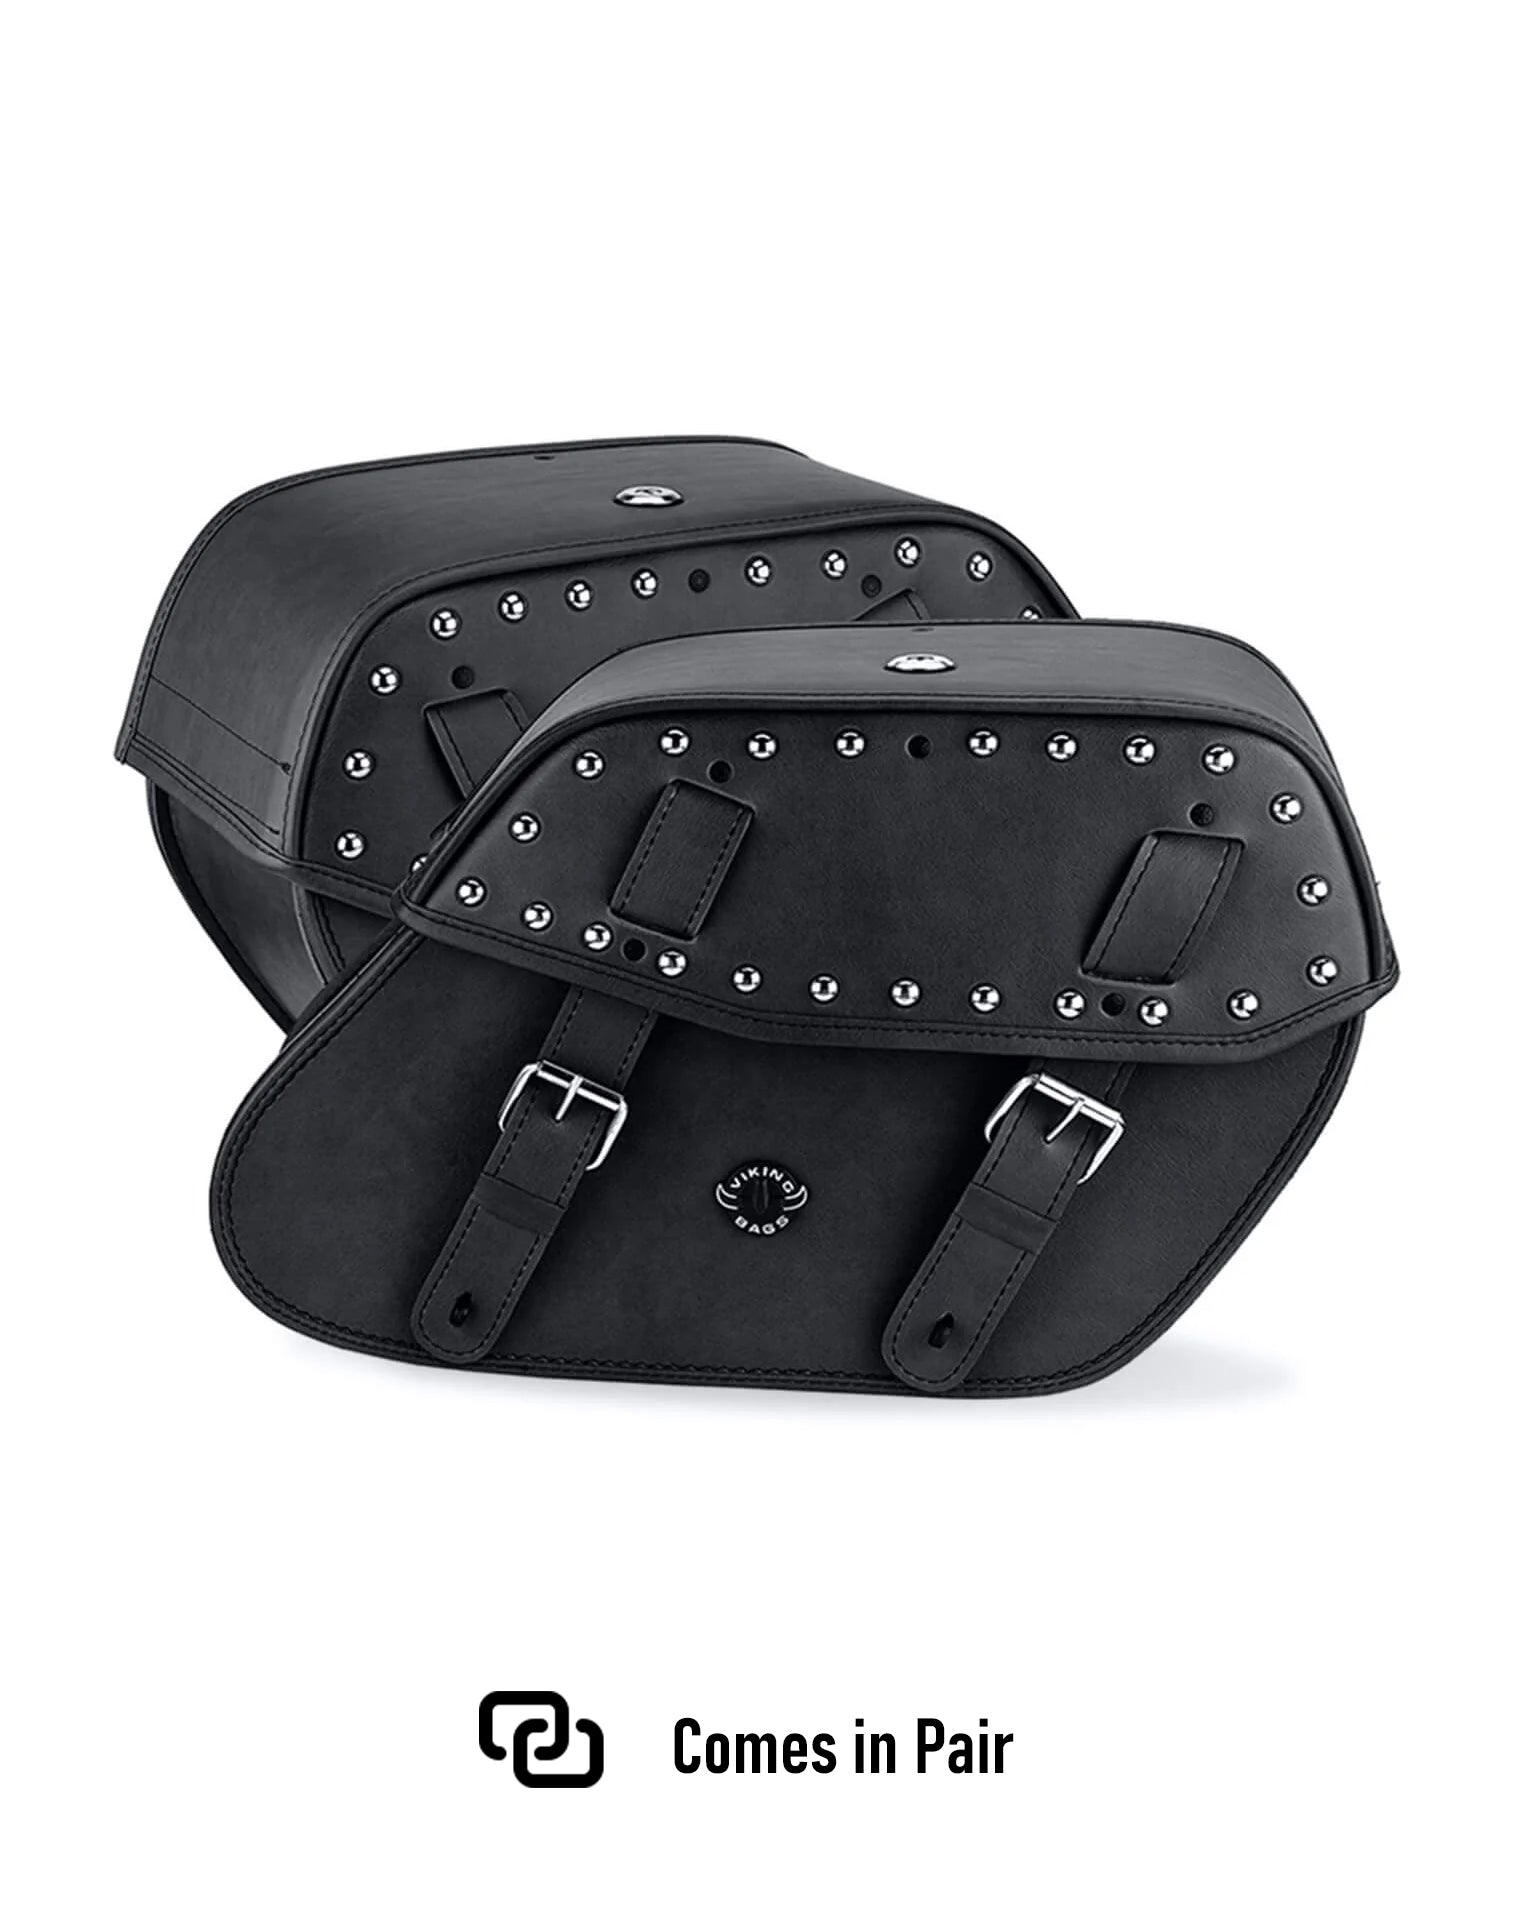 Viking Odin Large Triumph Thunderbird Studded Leather Motorcycle Saddlebags Weather Resistant Bags Comes in Pair